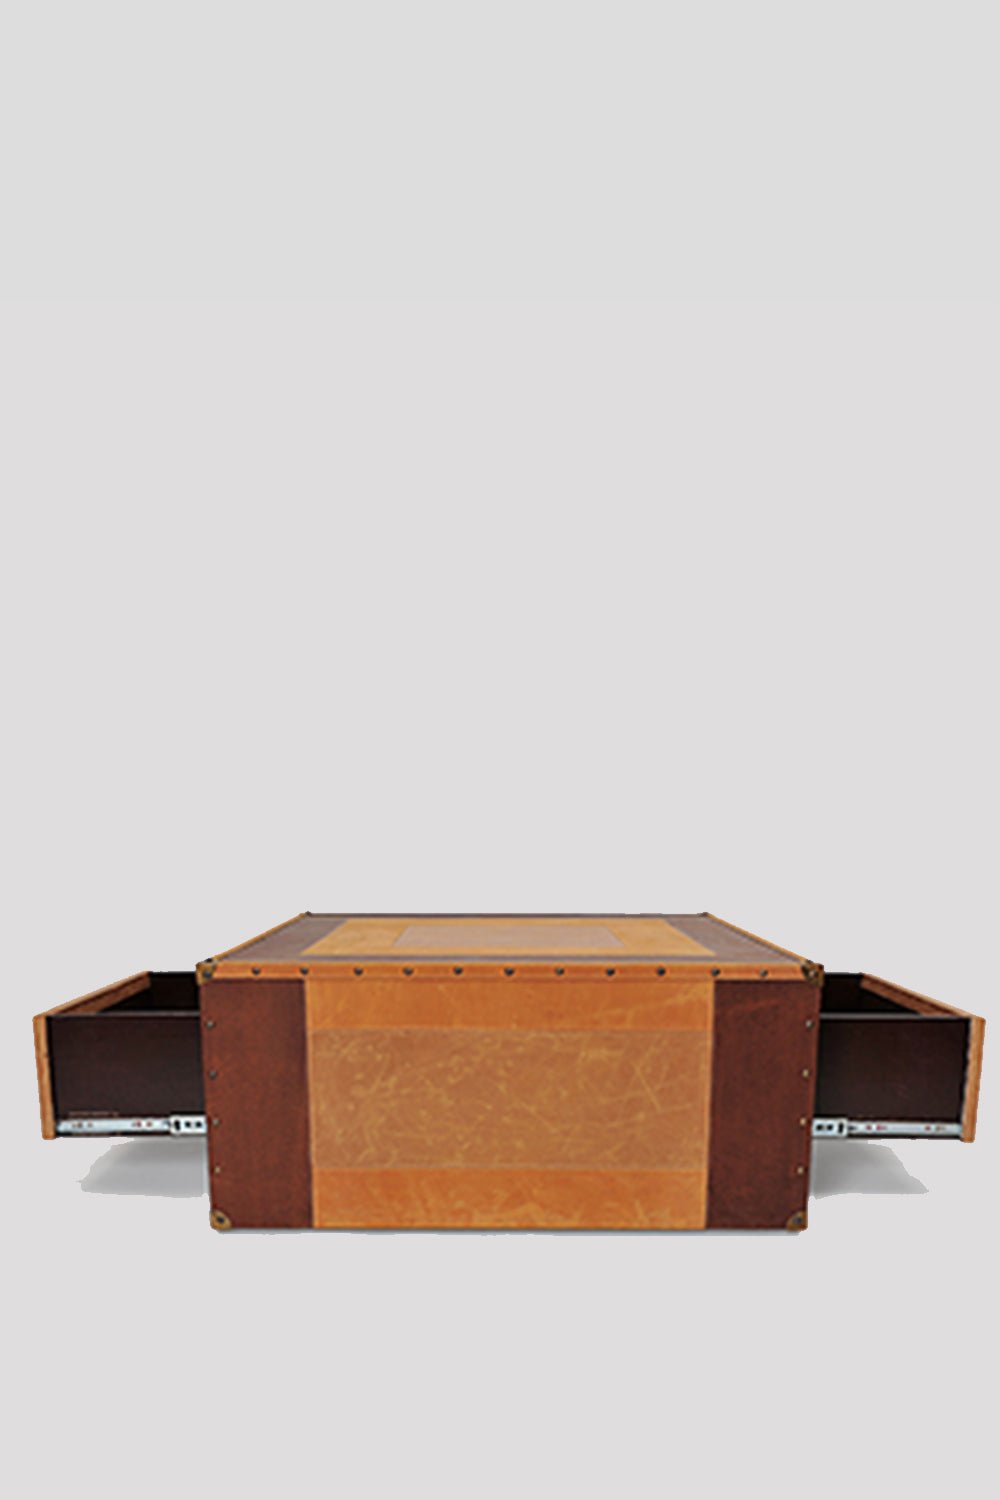 MALABAR LEATHER COFFEE TABLE WITH TWO DRAWERS - ART AVENUE